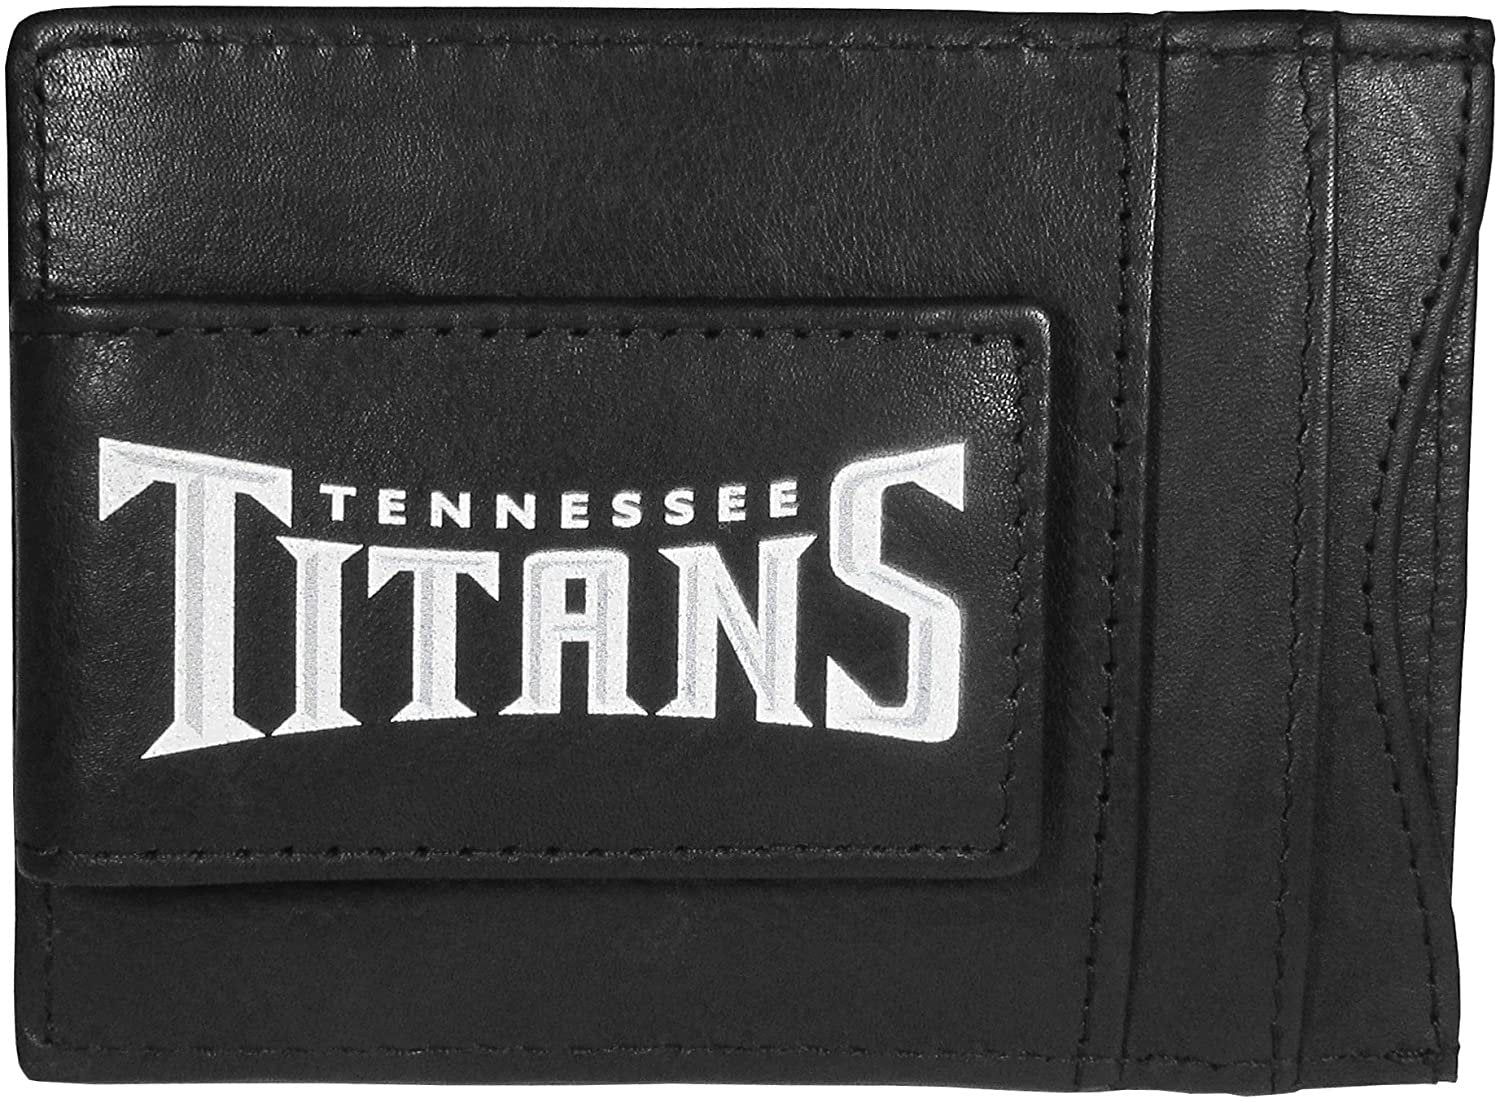 Tennessee Titans Black Leather Wallet, Front Pocket Magnetic Money Clip, Printed Logo